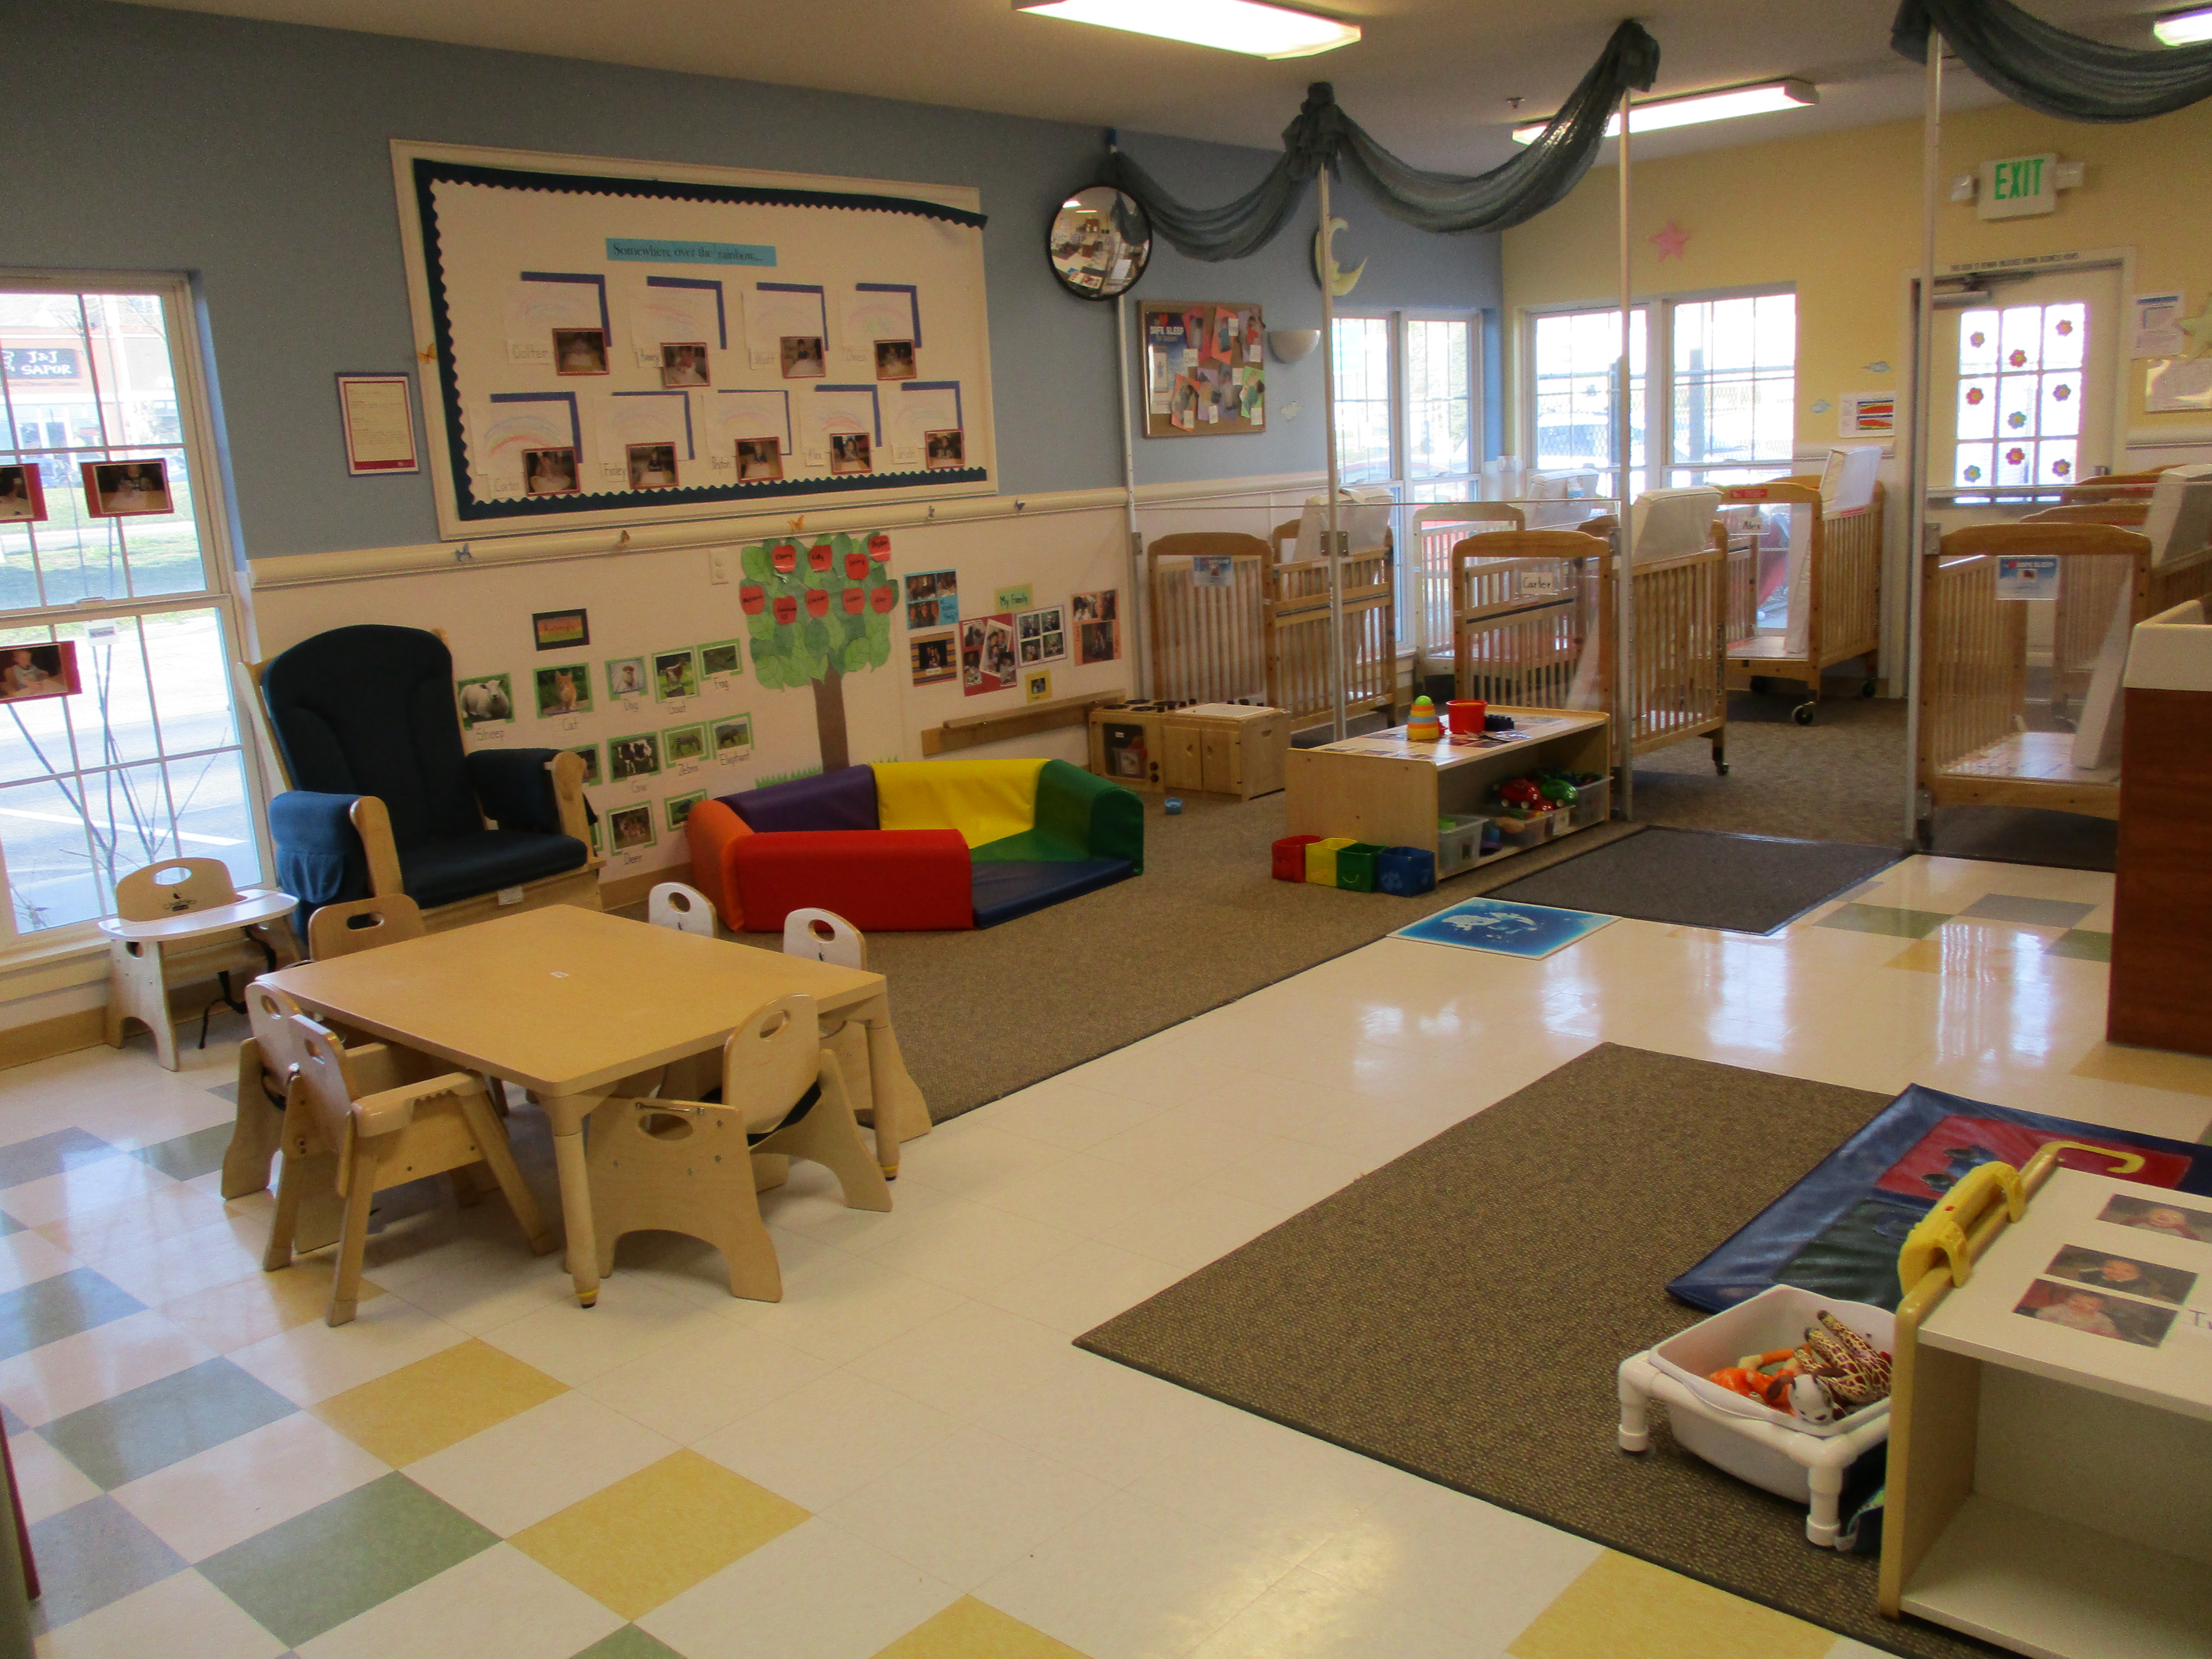 Our older infant room provides lots room to explore and grow